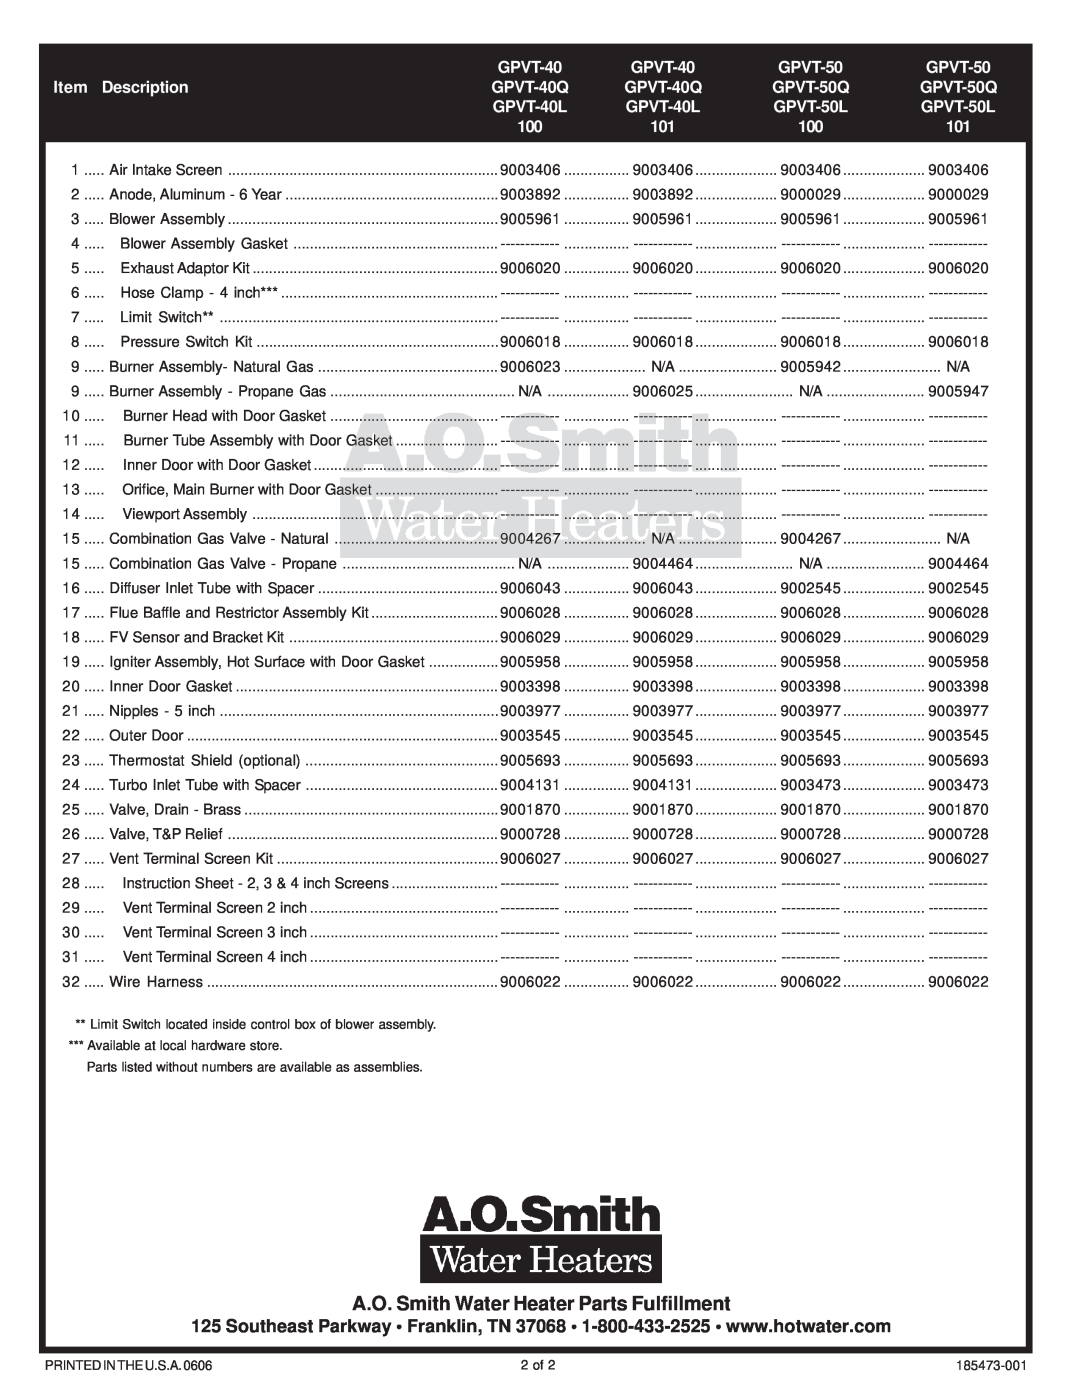 A.O. Smith GPVT 50Q, GPVT 40Q, GPVT 40L, GPVT 50L manual A.O. Smith Water Heater Parts Fulfillment 